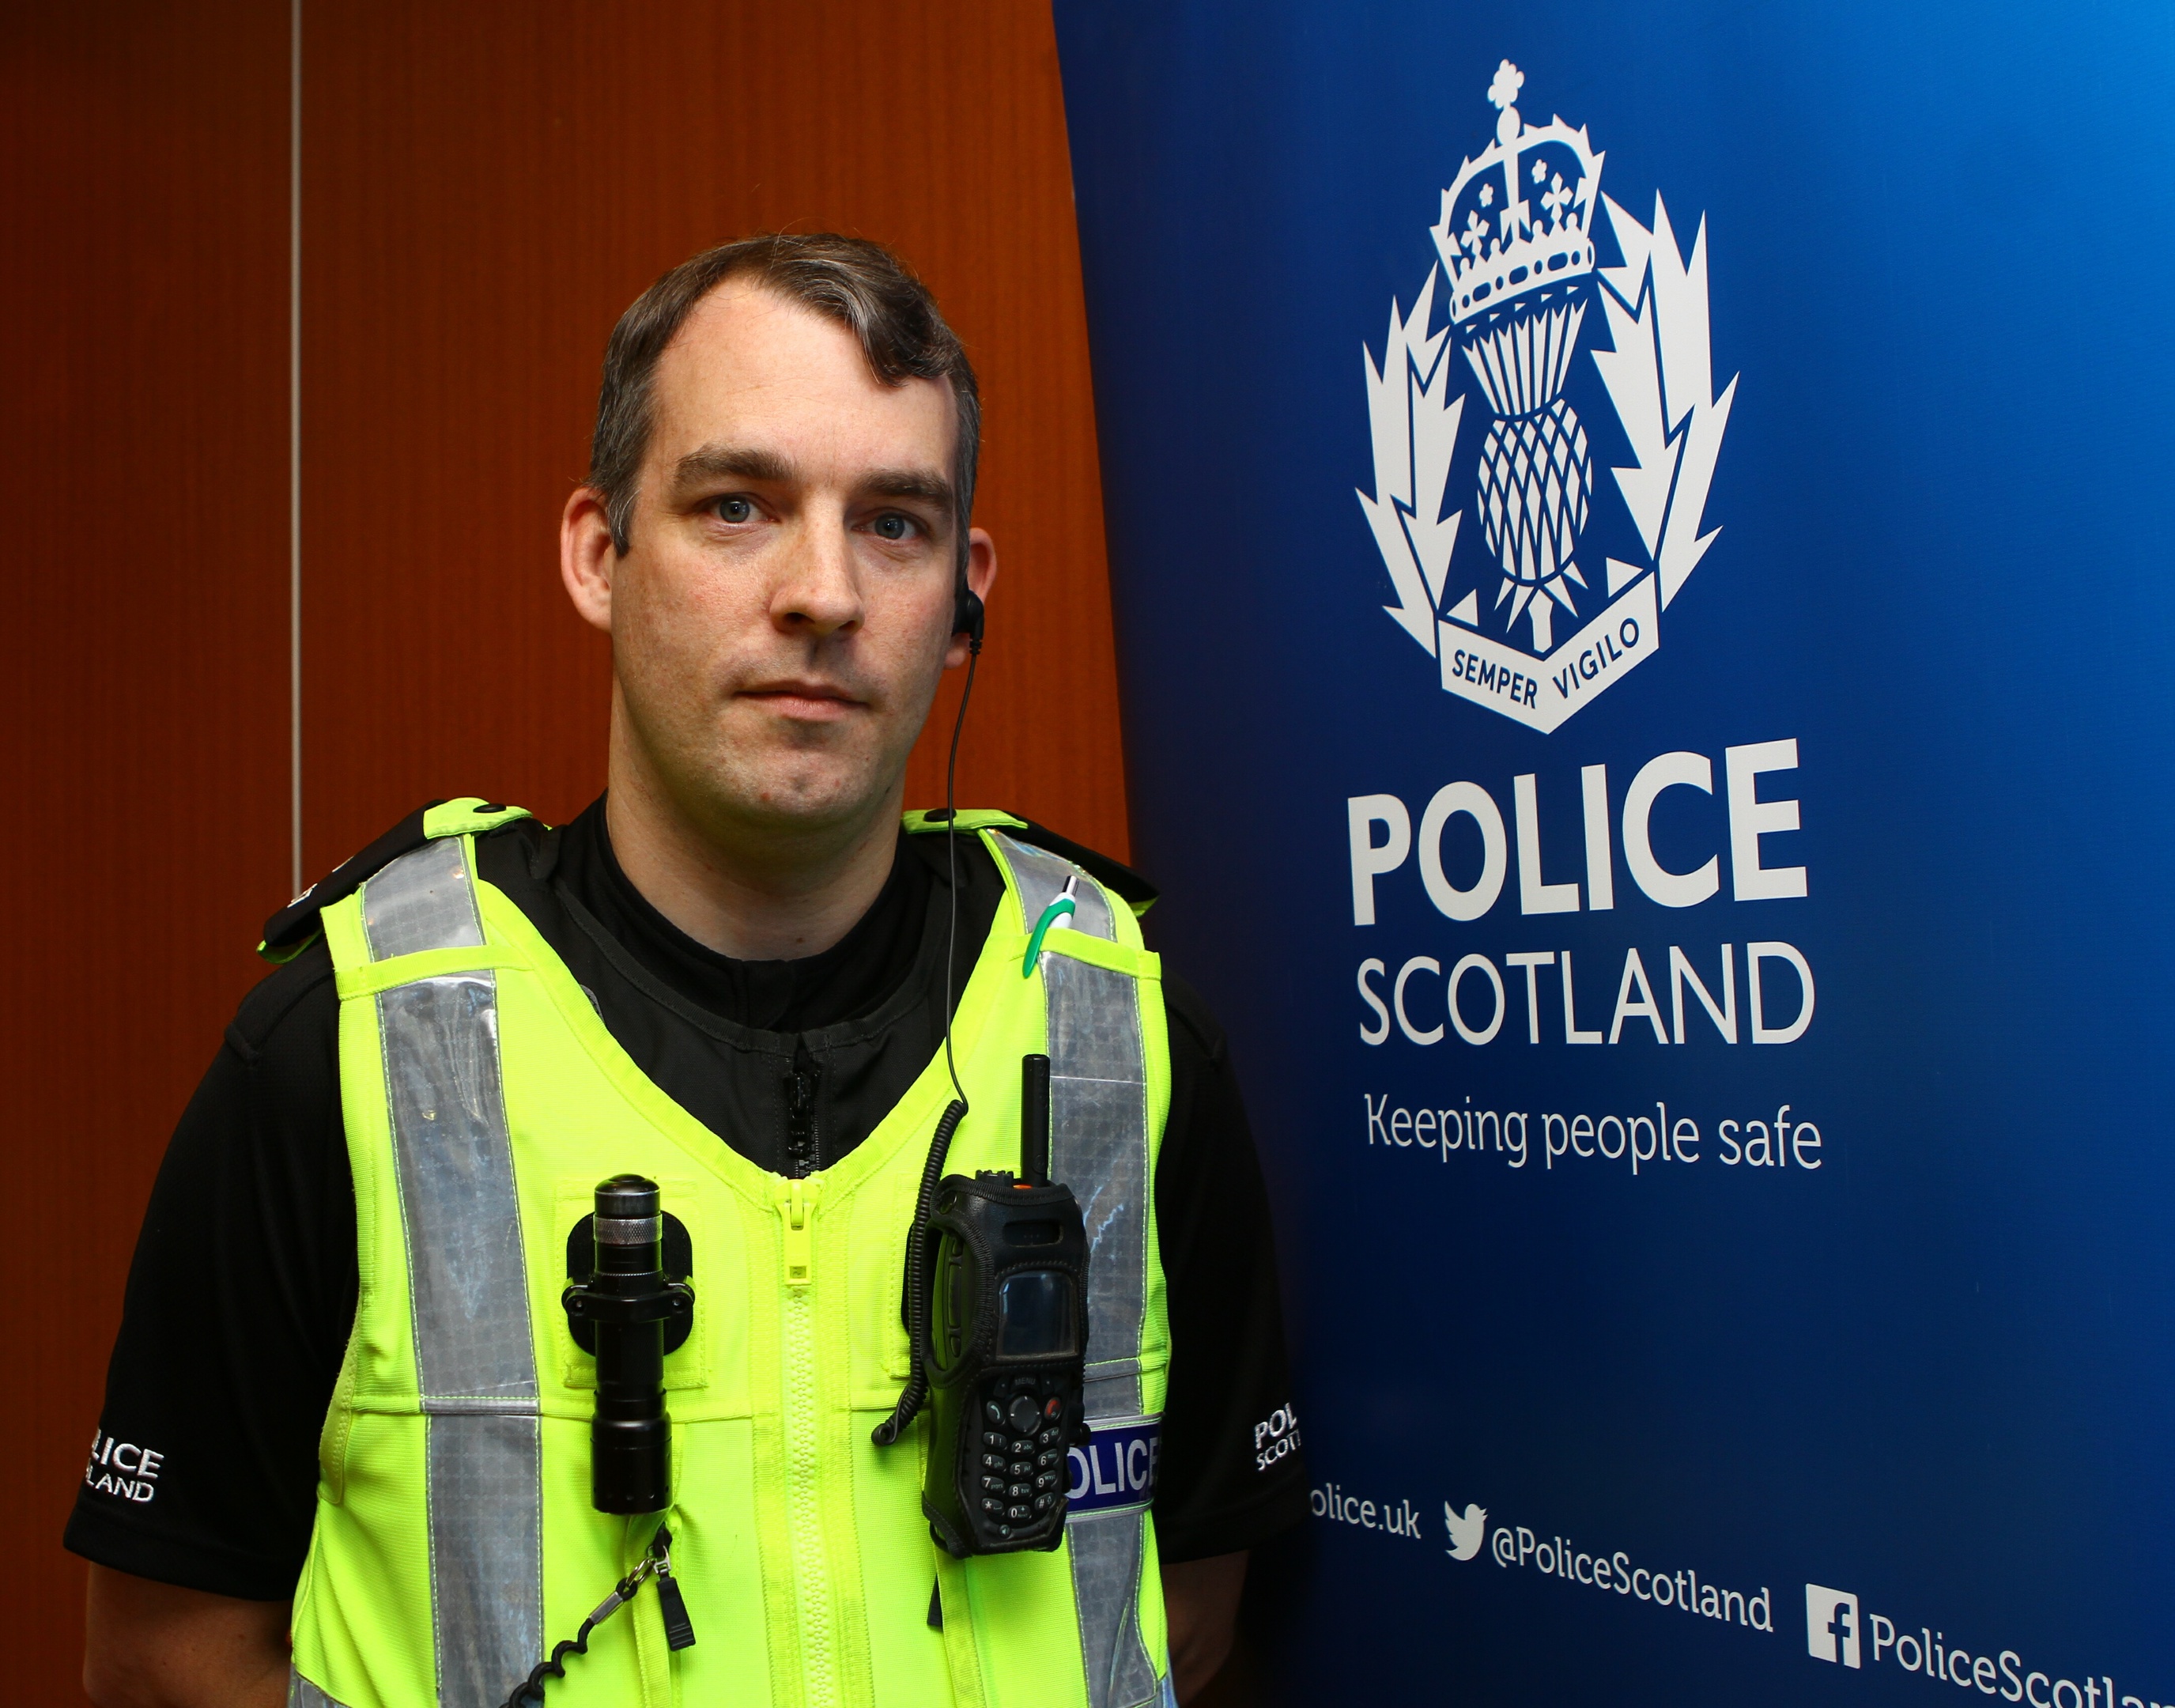 PC North issued a warning about doorstep crime at a press conference in Bell Street.